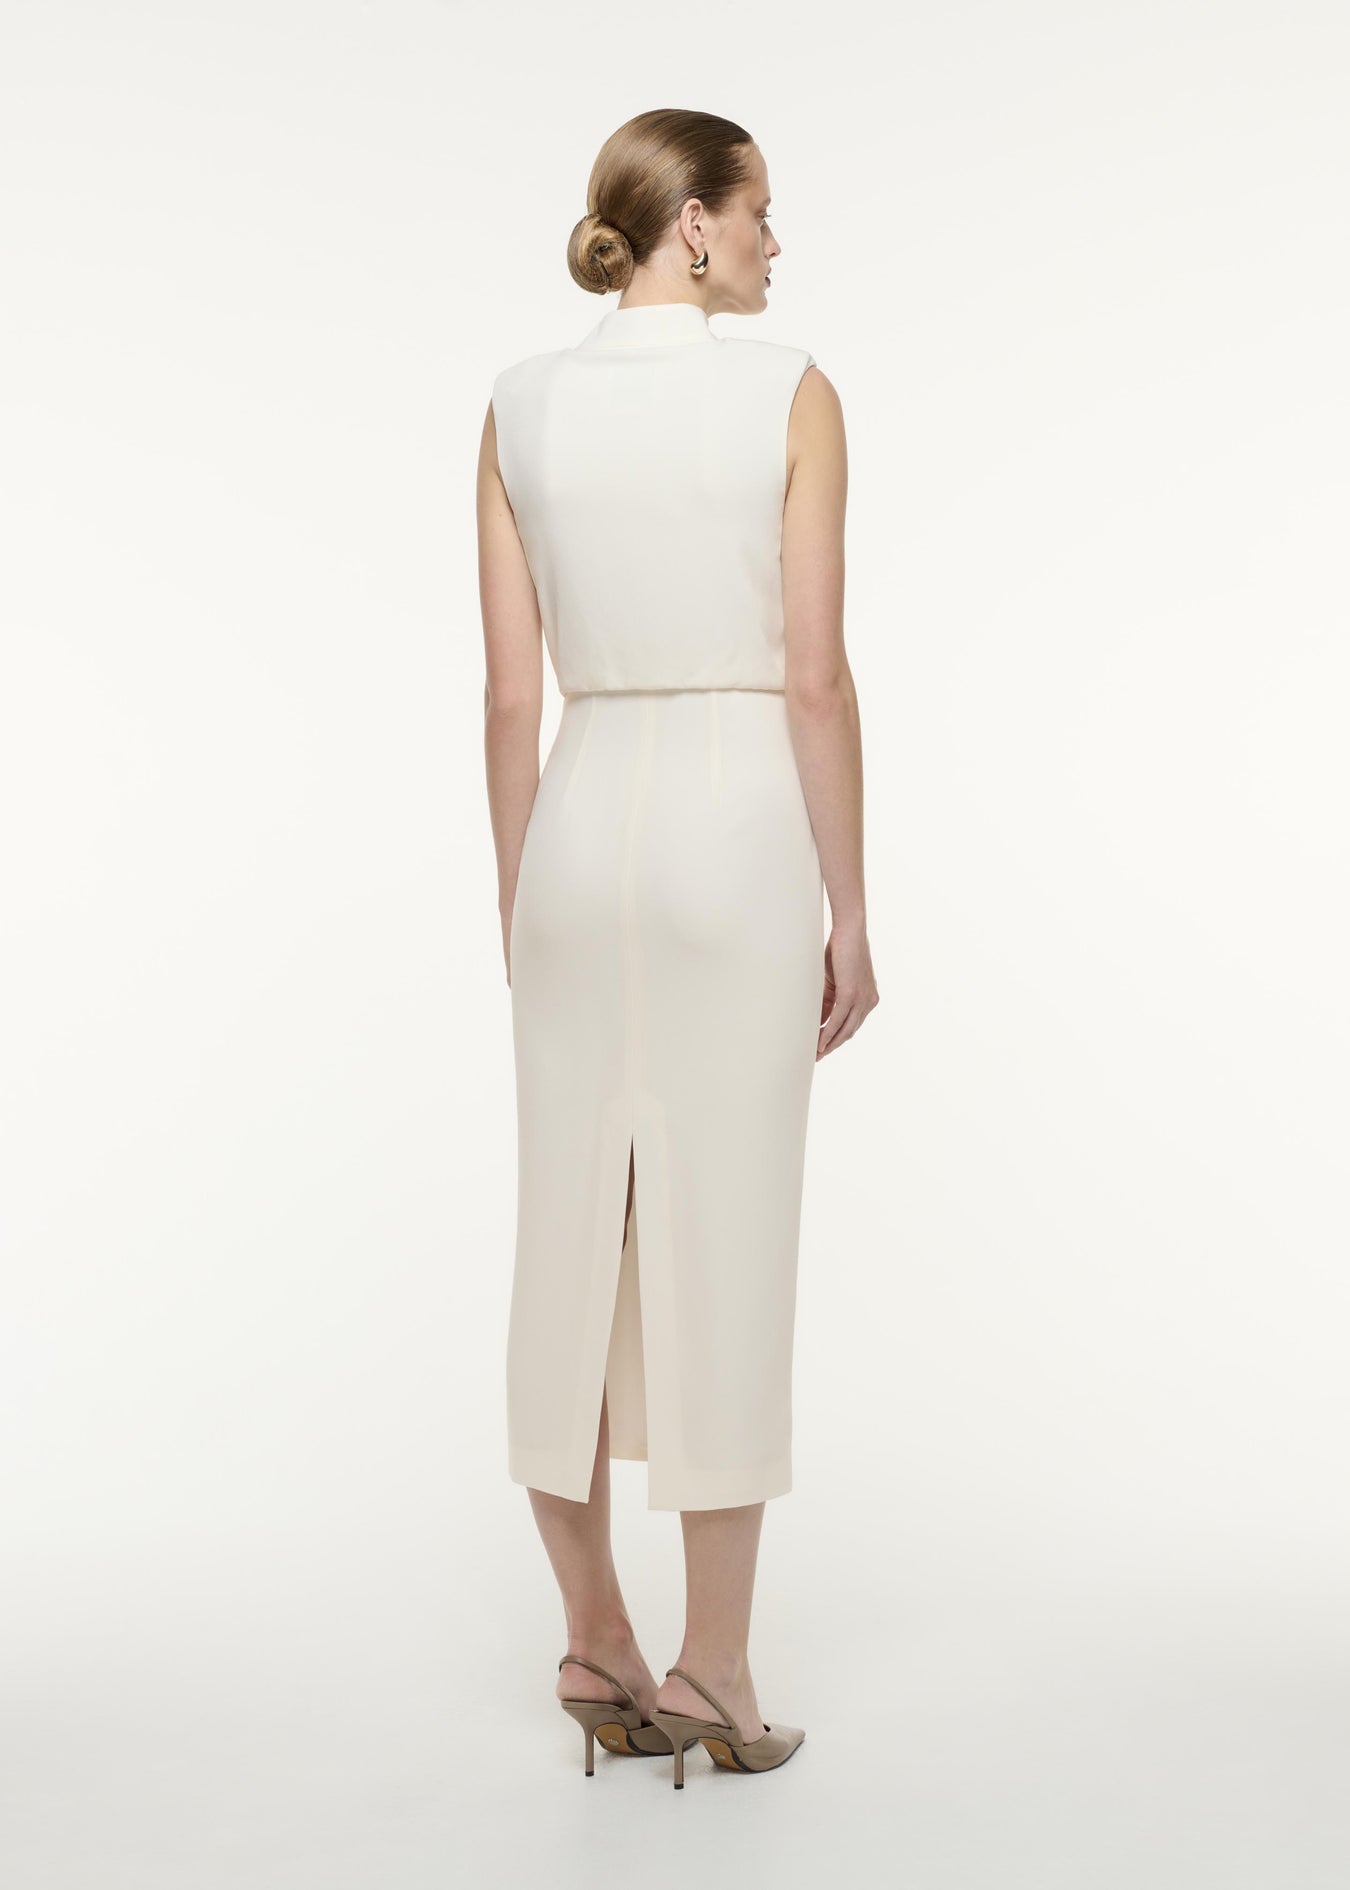 A back view image of a model wearing the Satin Crepe Midi Dress in Cream